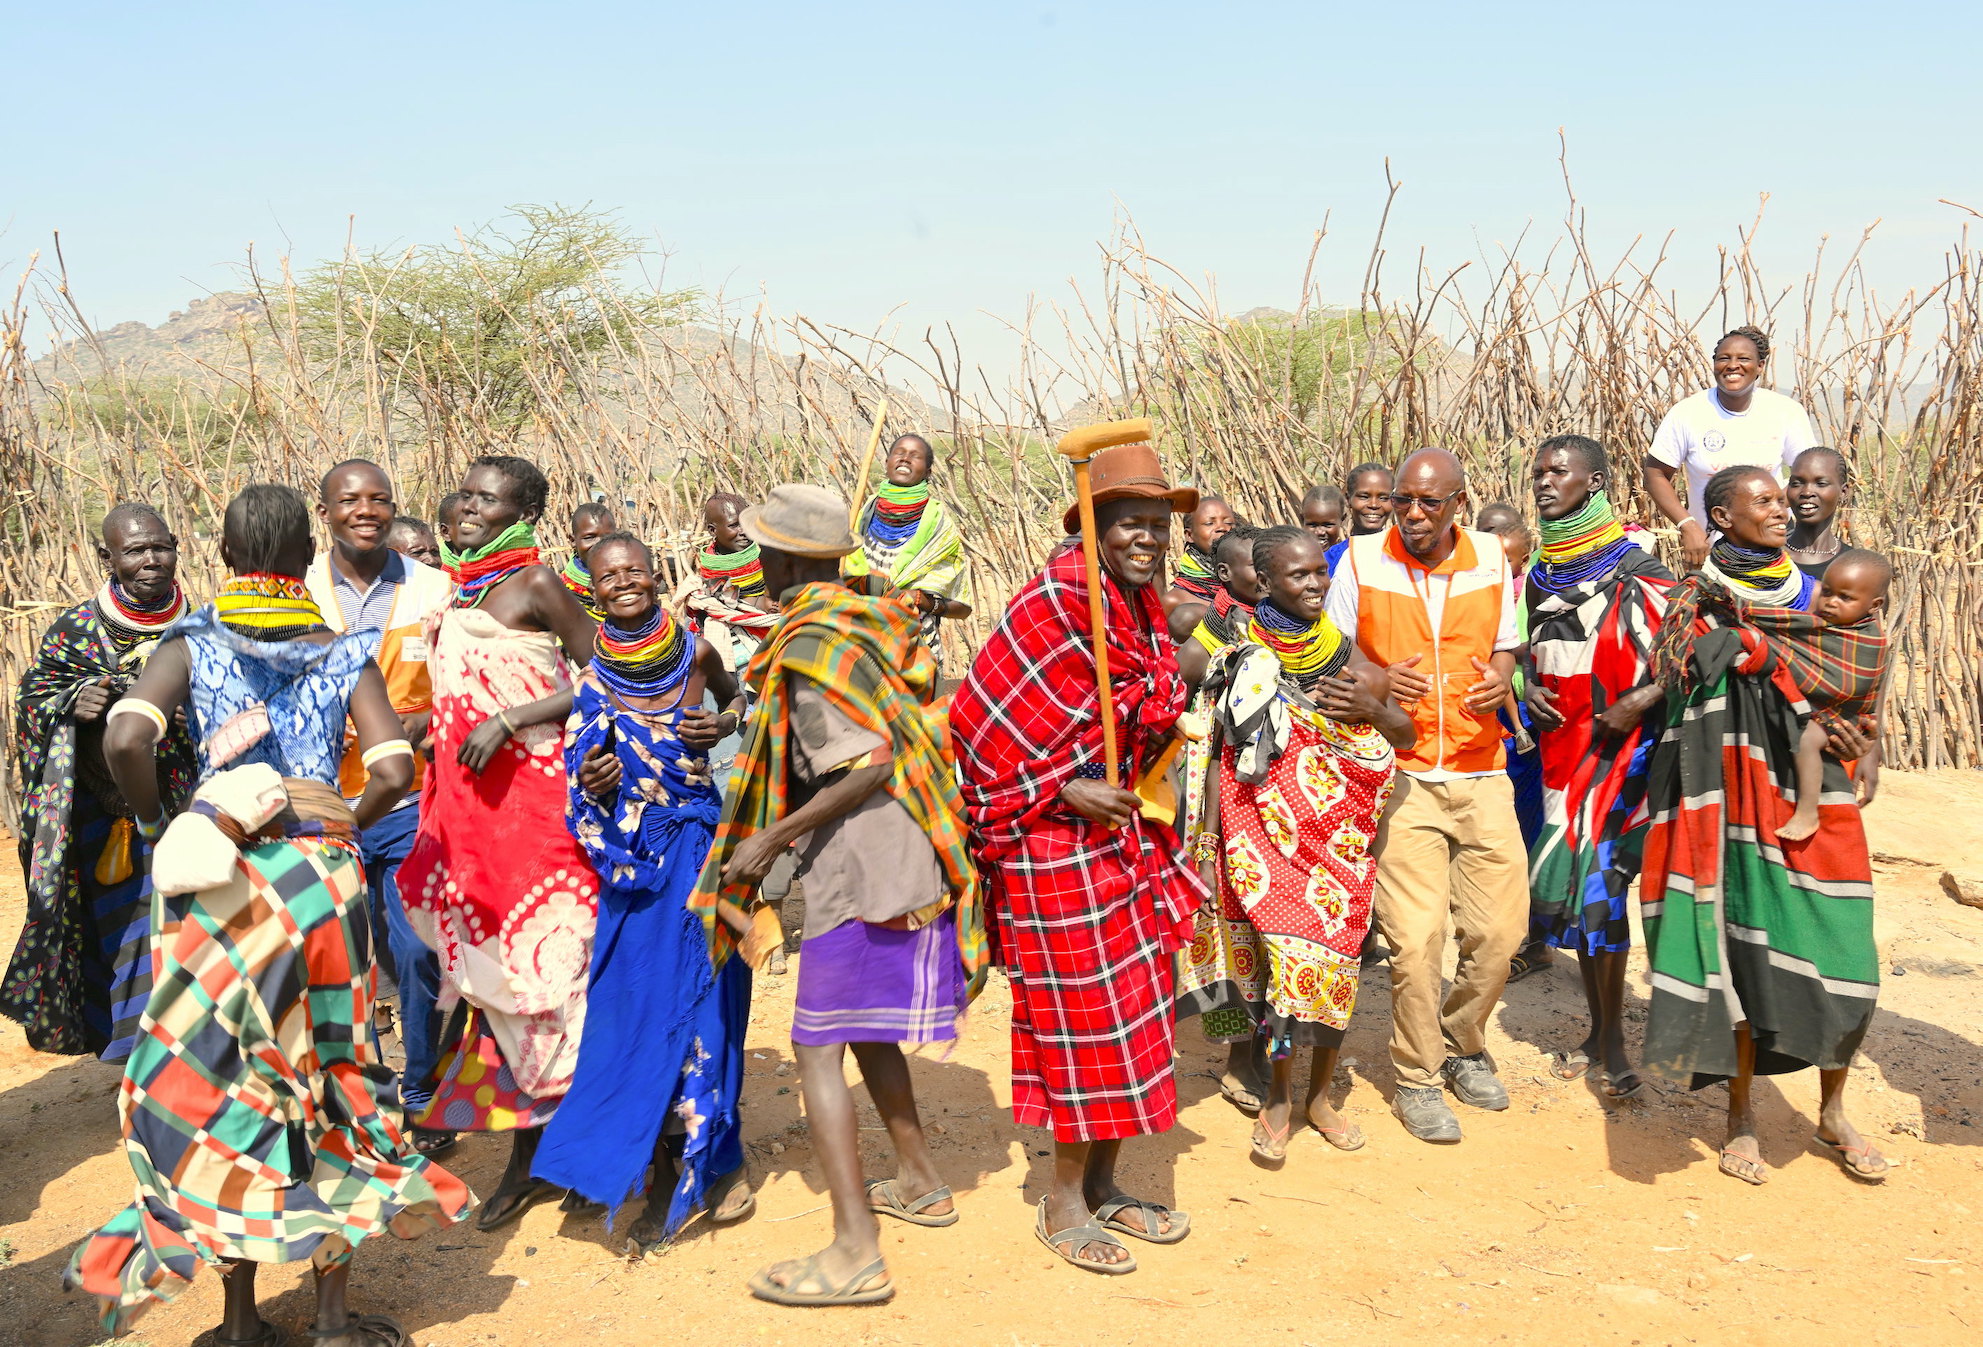 Residents of Katukuri Village in Turkana County were glad that their home declared Open Defecation Free by the County Government. World Vision suppors  